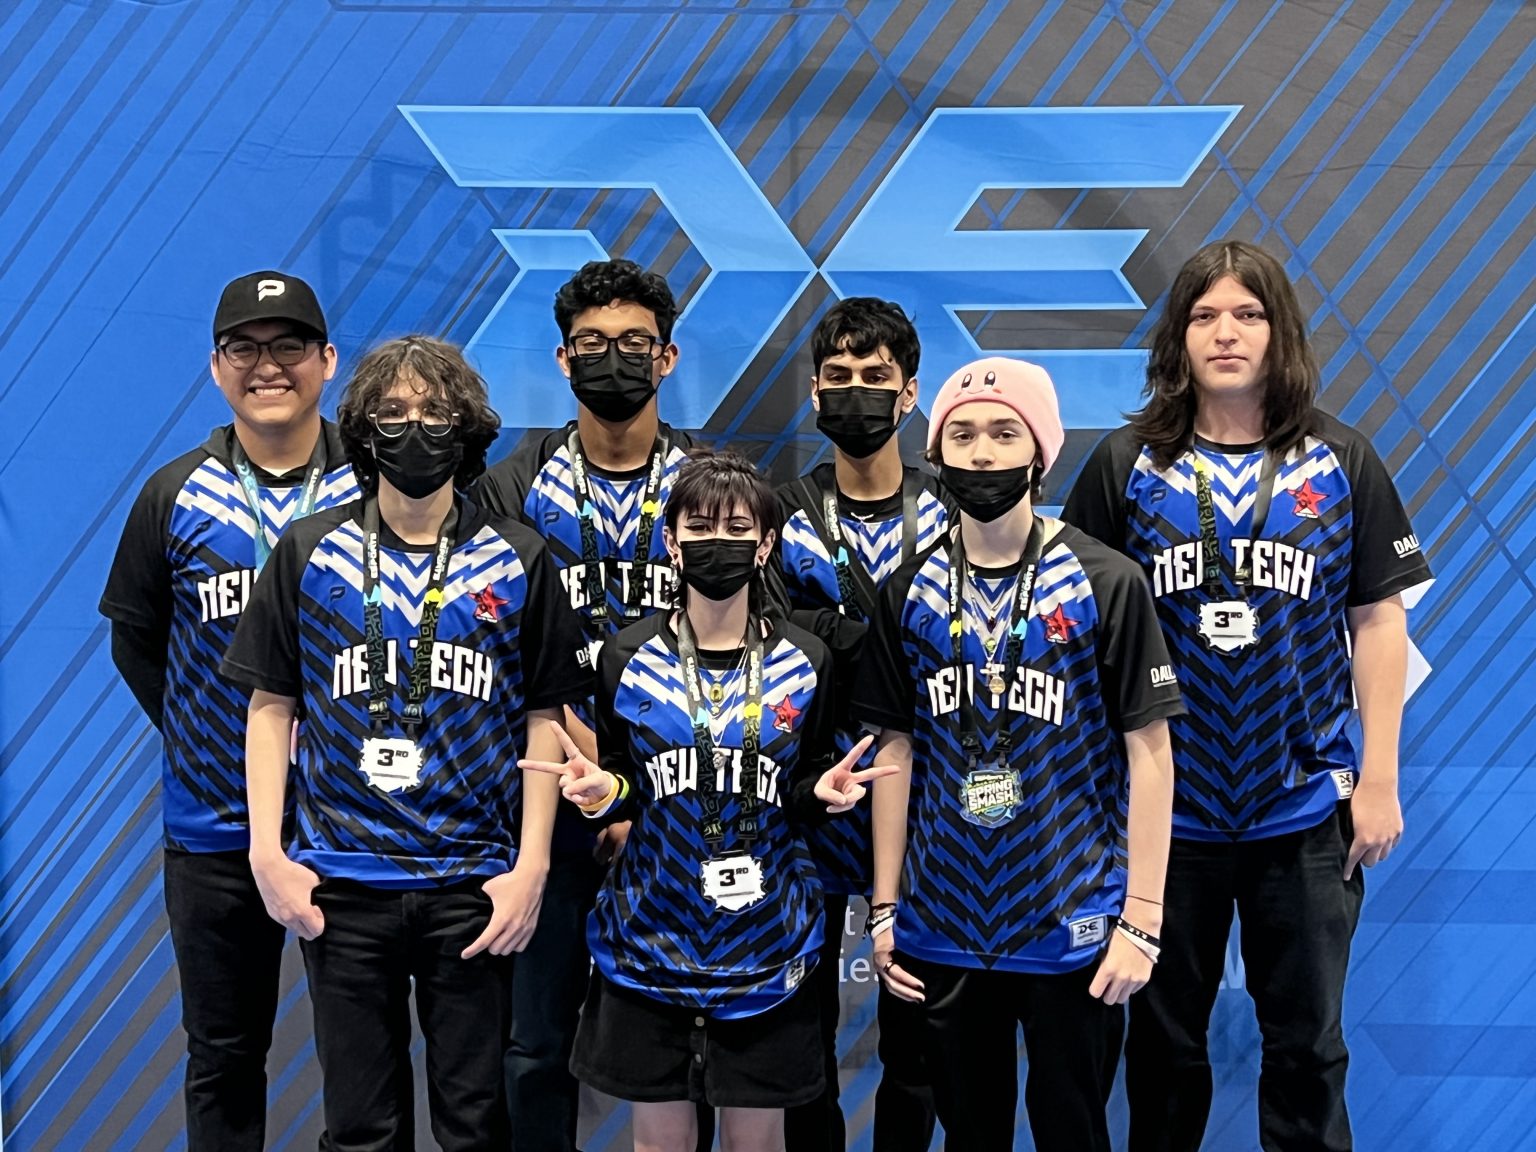 Younger gamers smash it out at Dallas ISD esports tournament